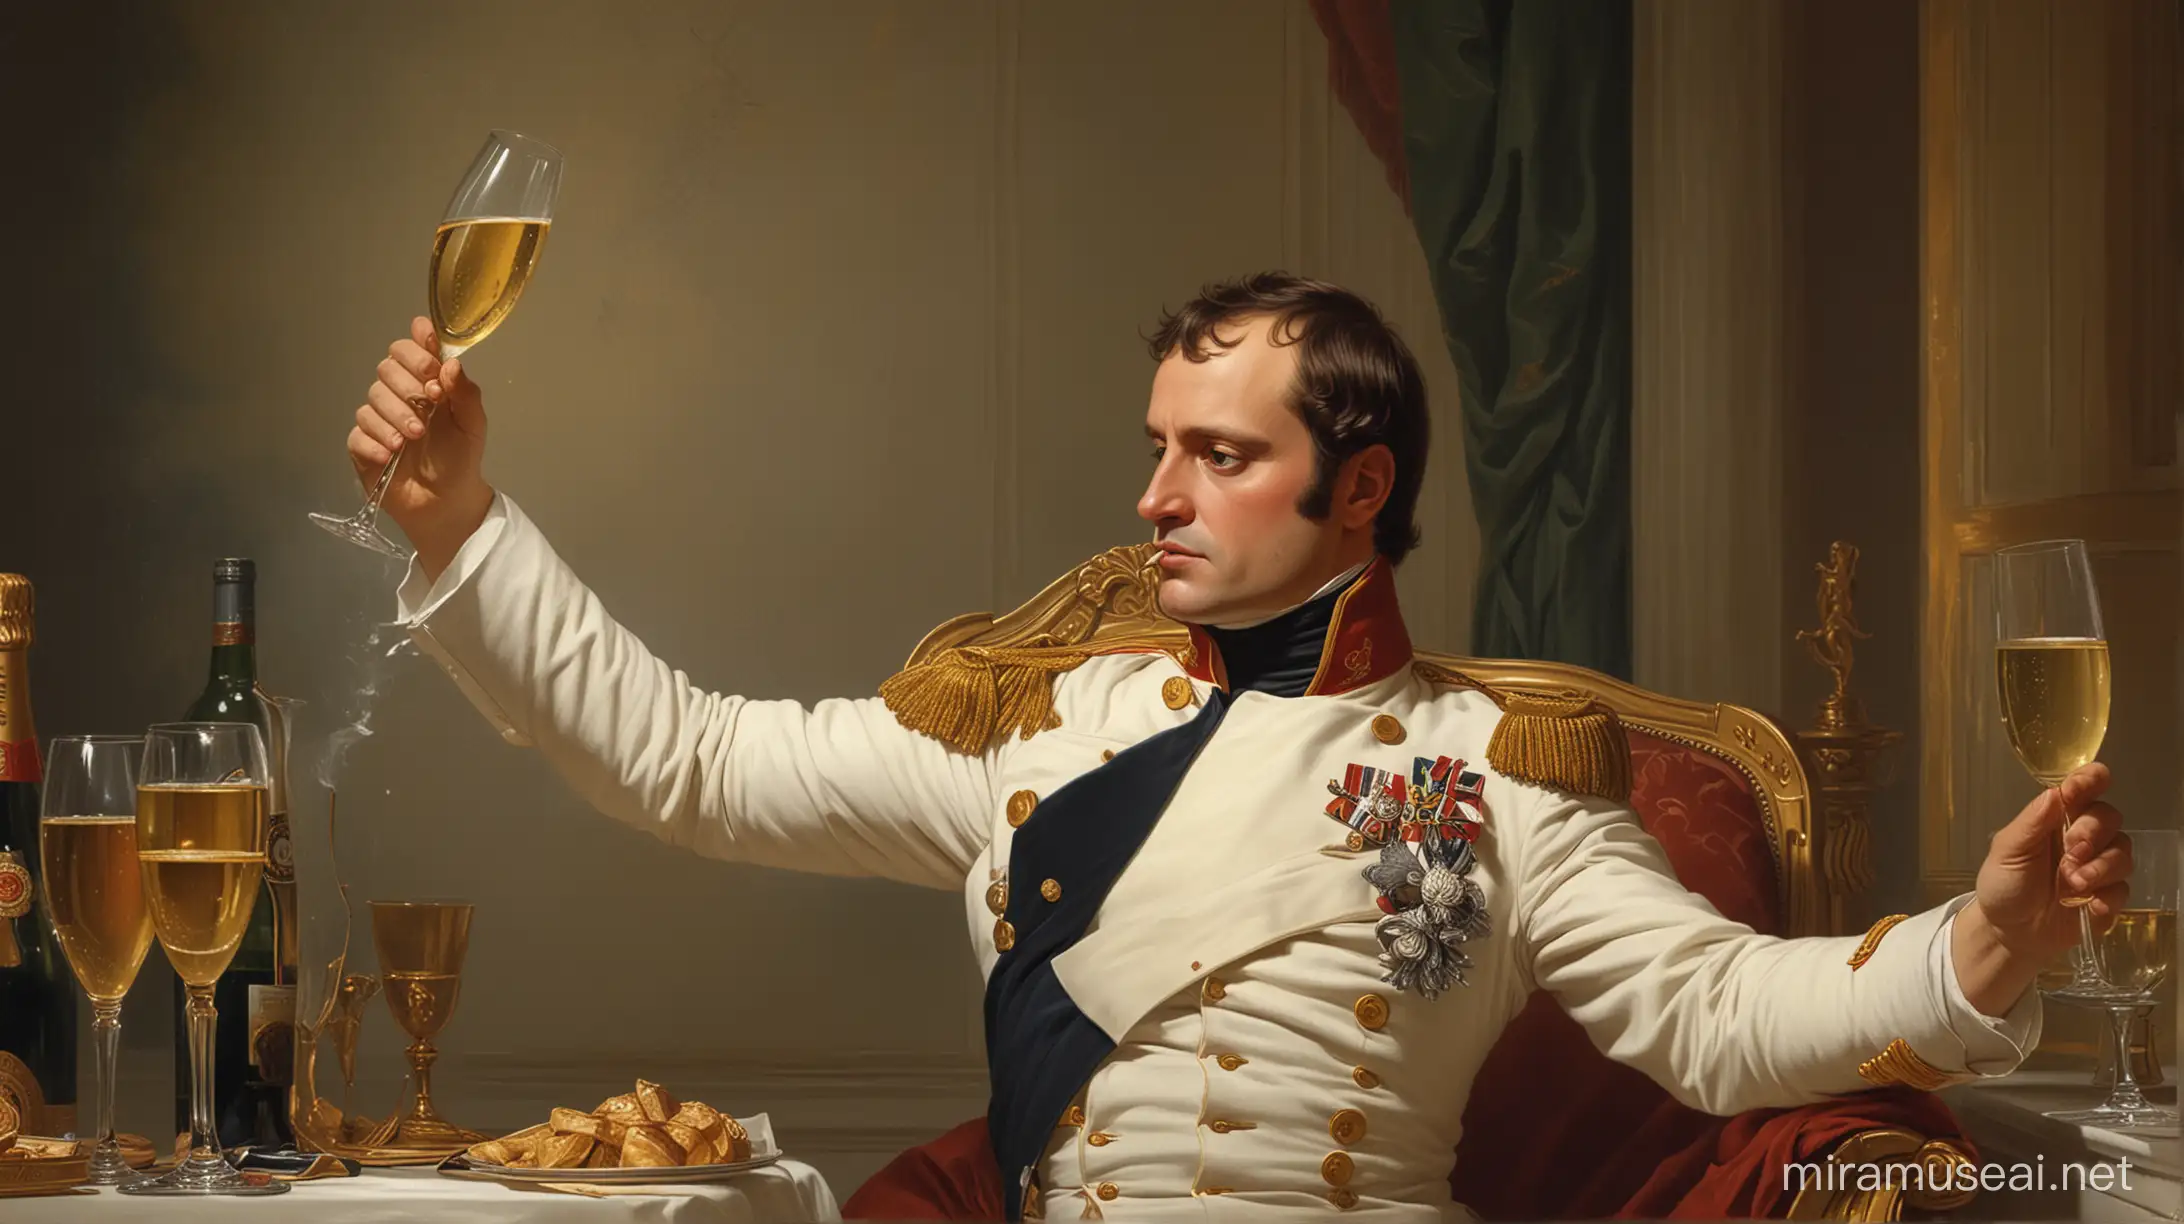 Napoleon Bonaparte elegantly sips Champagne wine while celebrating a victorious campaign, exuding confidence and triumph,

Rendered in a classical painting style reminiscent of neoclassicism, capturing the grandeur of the Napoleonic era. Draw inspiration from Jacques-Louis David's historical paintings for composition and mood,

Illuminate the scene with soft, golden lighting to enhance the luxurious ambiance. Use a palette of rich, regal colors to convey the opulence of the moment. Frame the composition with a subtle vignette to draw focus to Napoleon's commanding presence.